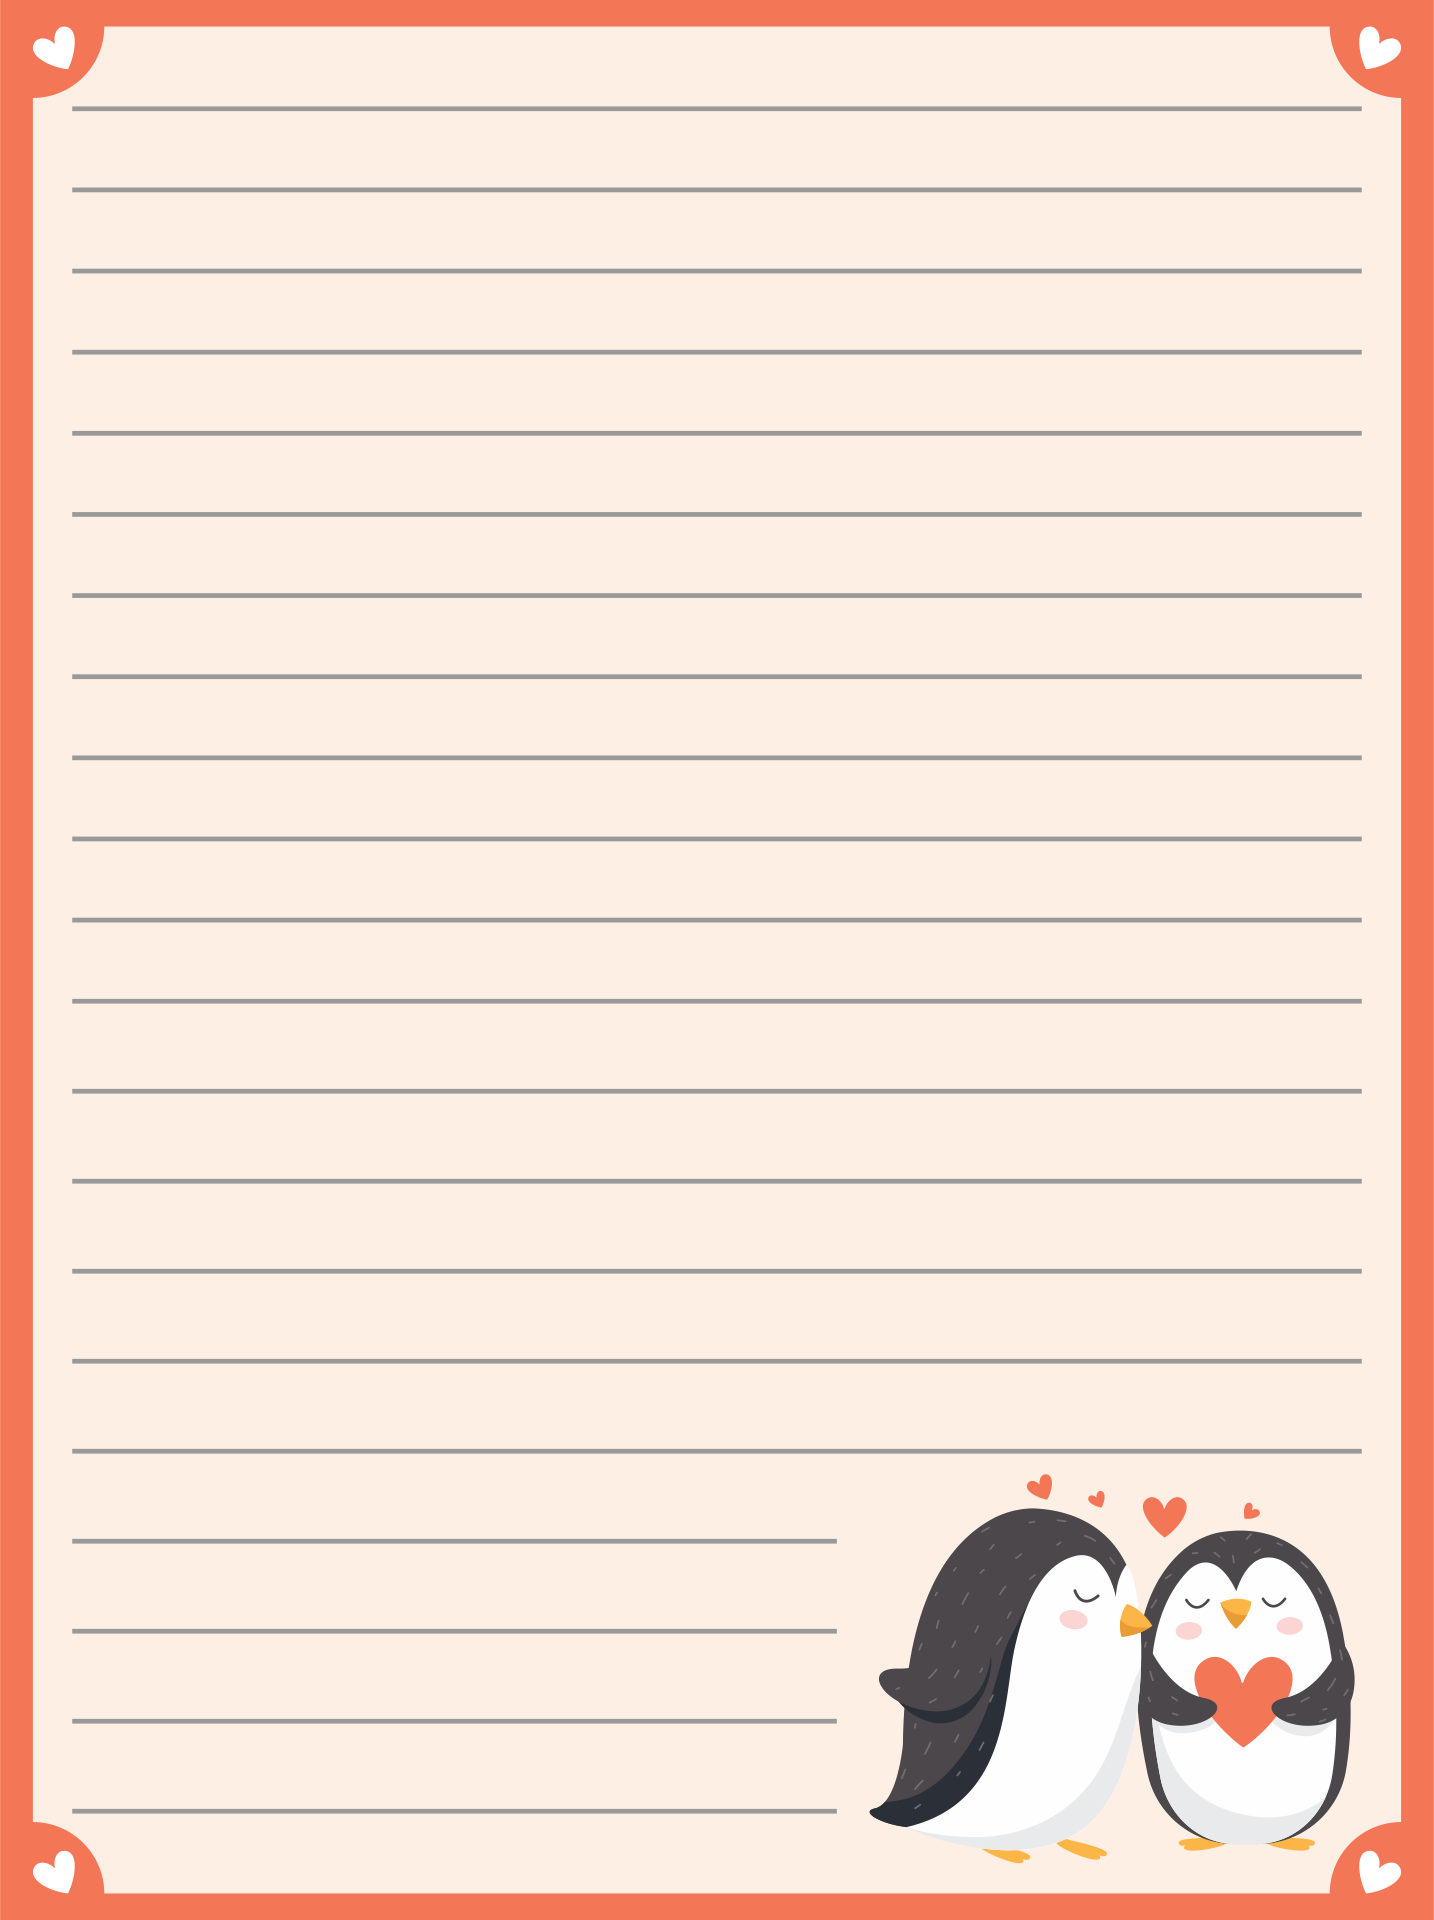 8 Best Images Of Printable Love Letter Stationery Free Printable Stationery Paper With Lines 